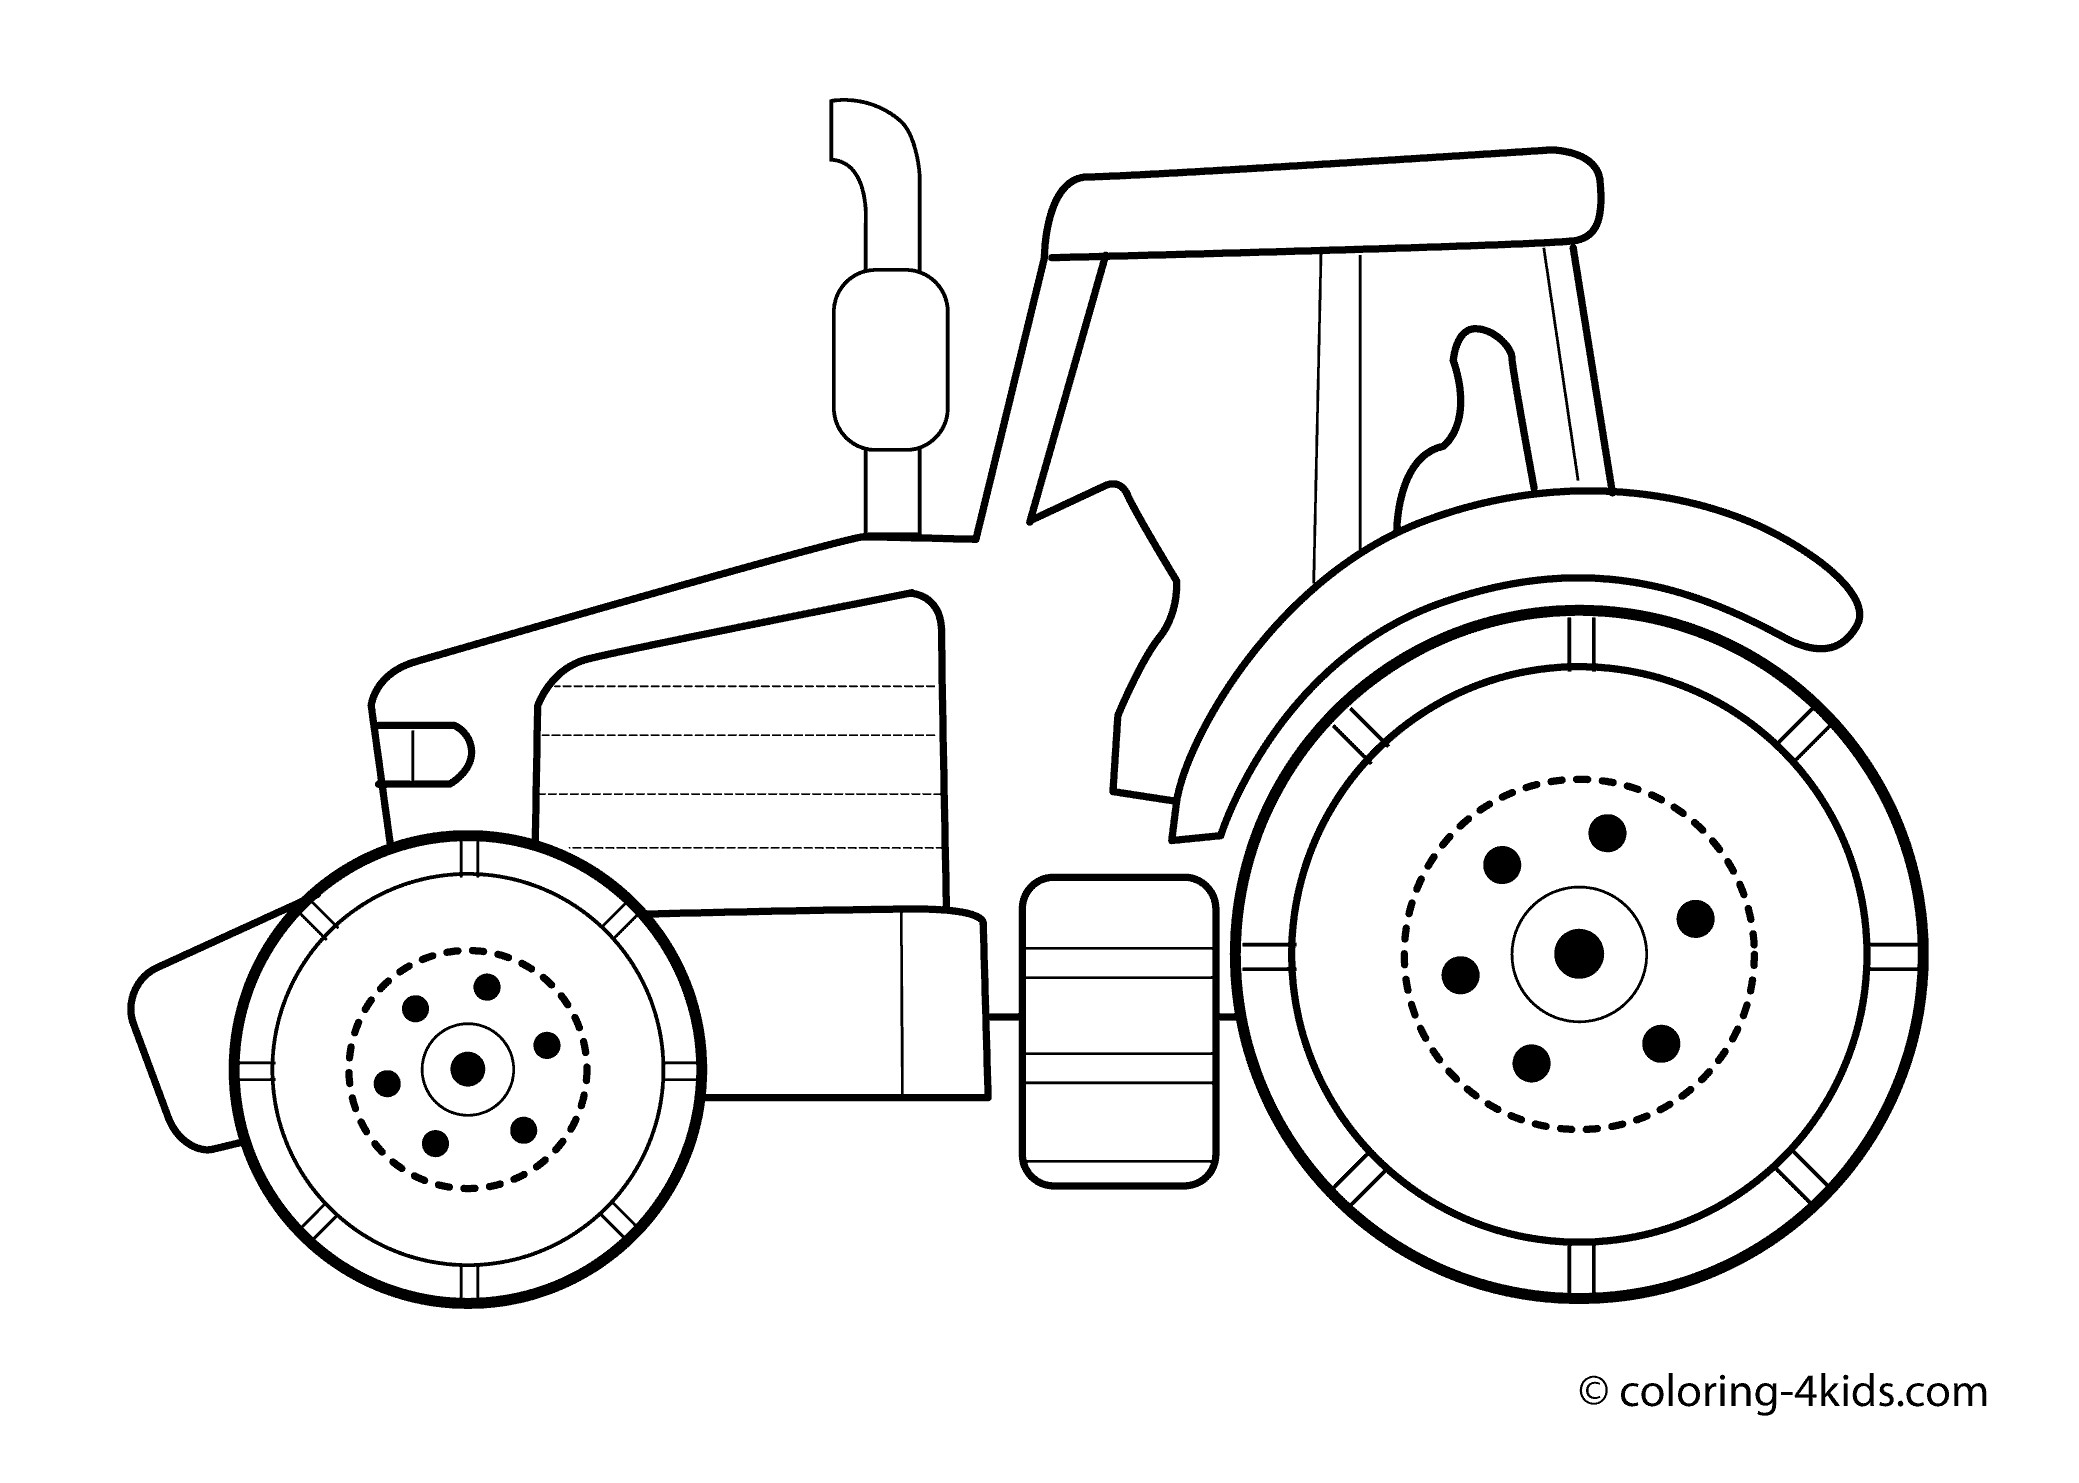 Tractor Coloring Pages For Kids
 Tractor Transport Coloring pages for kids printable